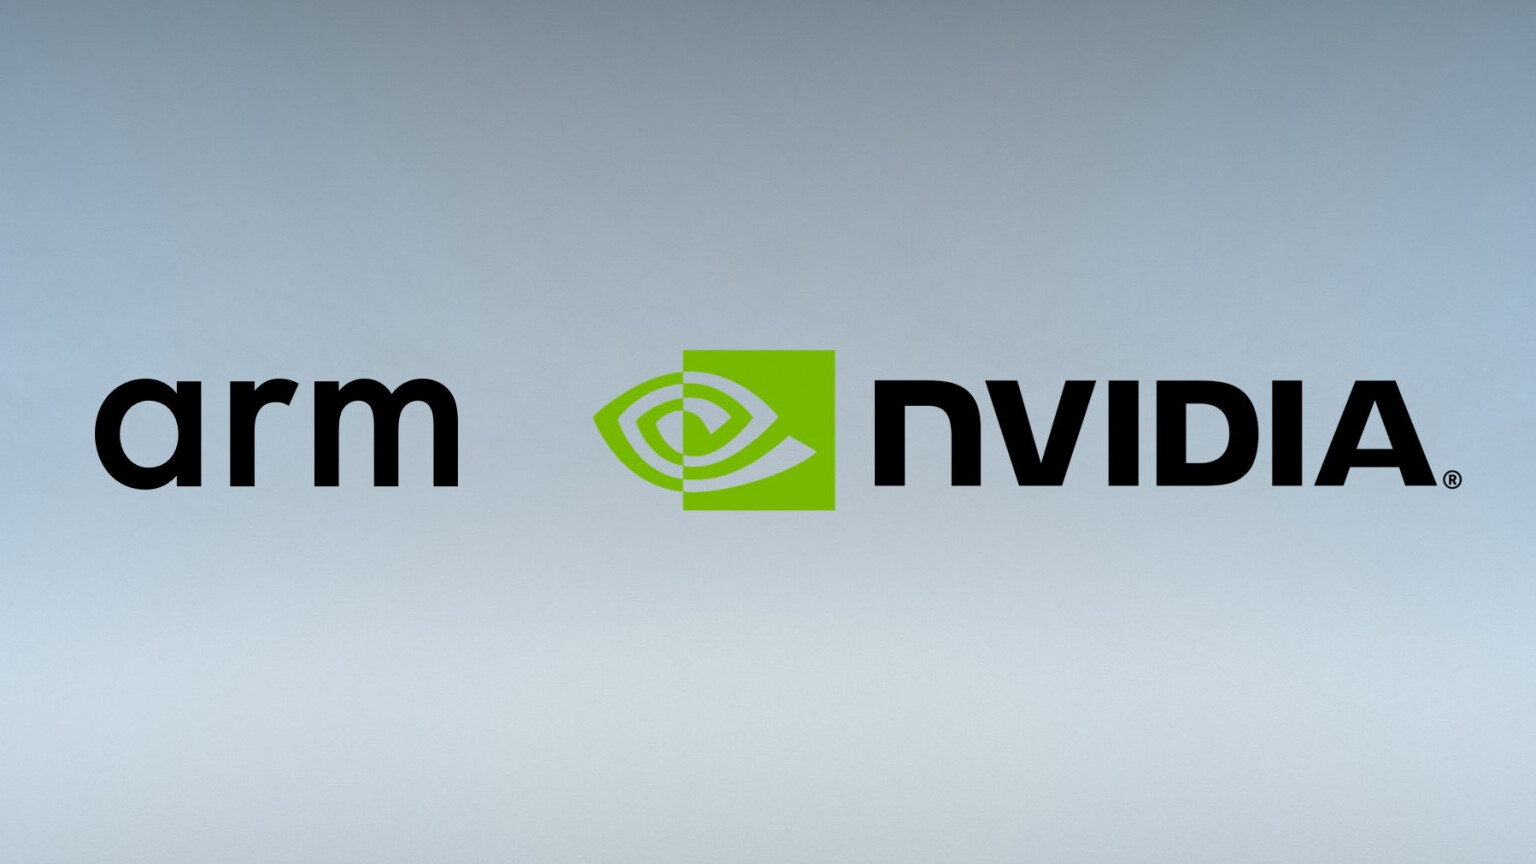 Nvidia confirms it’s buying Arm for $40B to expand its AI efforts